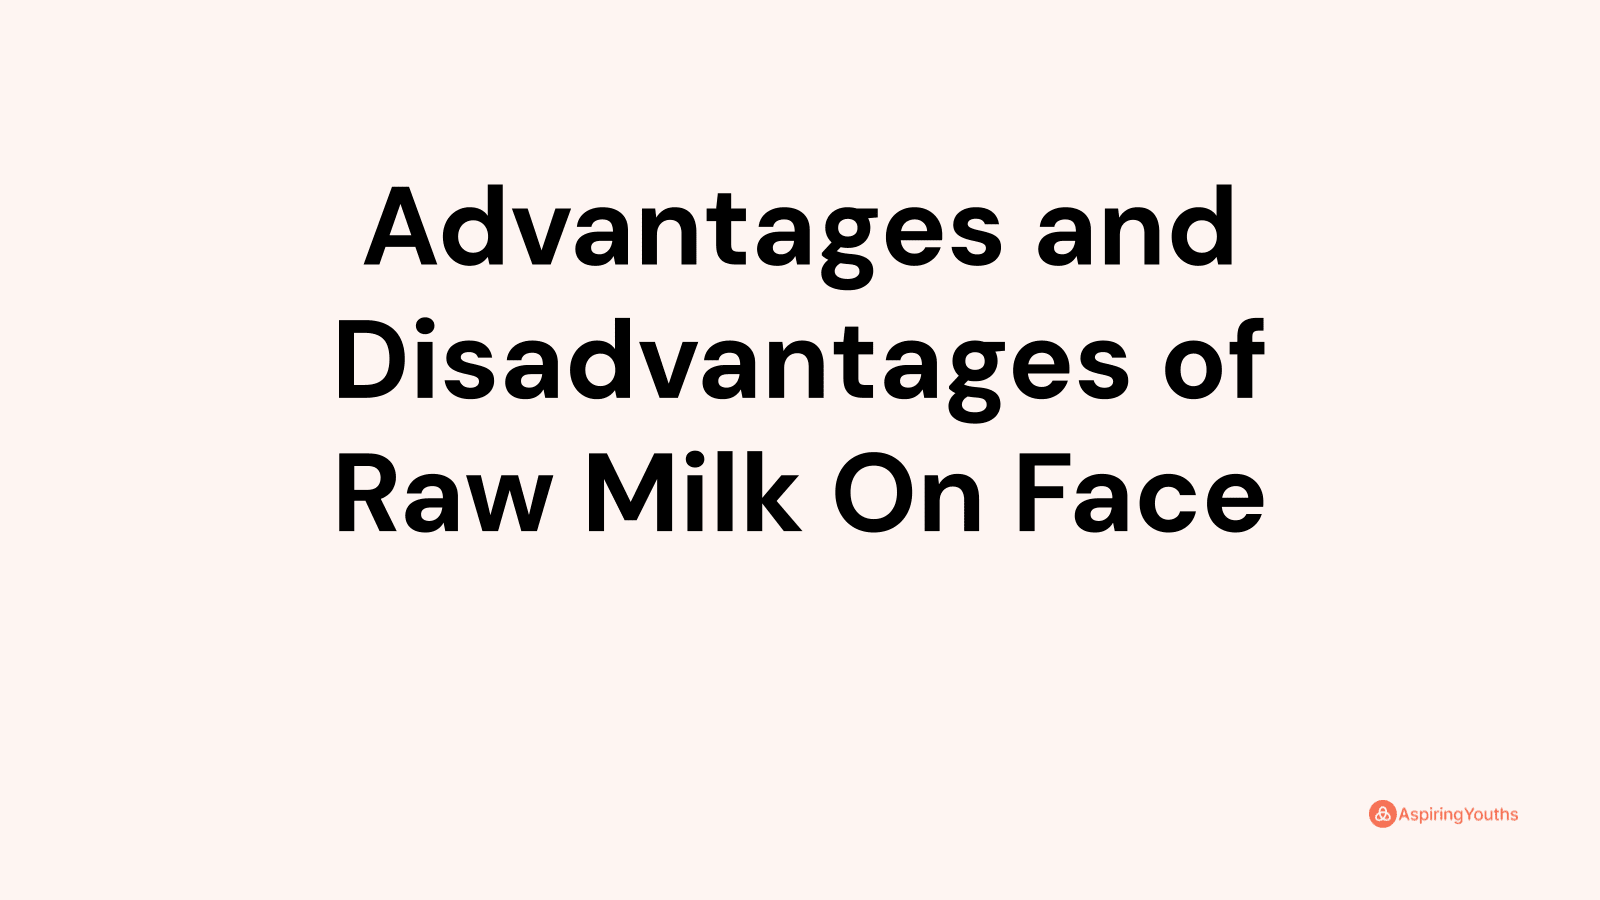 Advantages and disadvantages of Raw Milk On Face